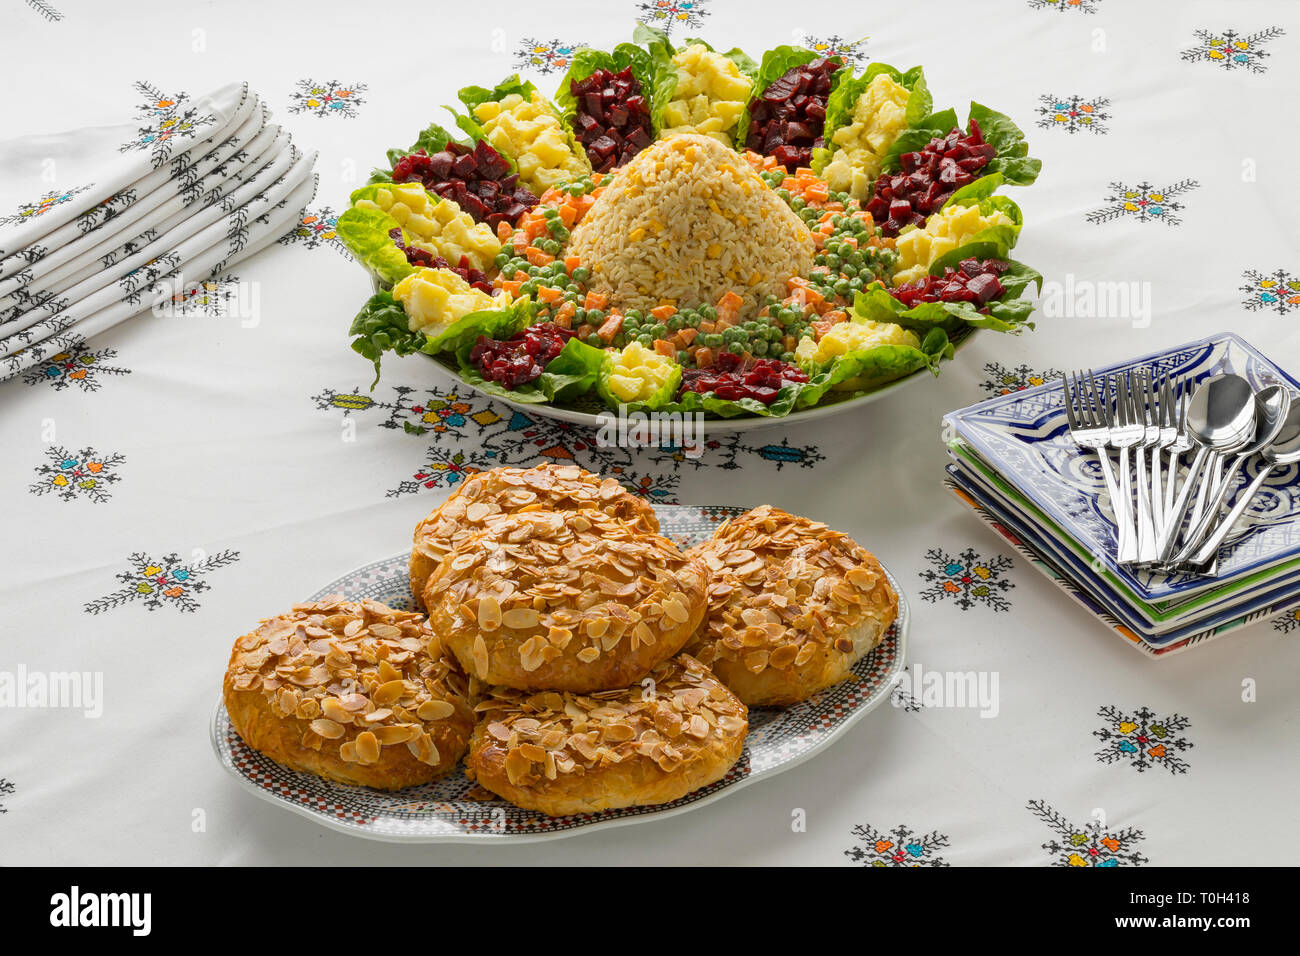 Dish with traditional festive Moroccan mixed salad and mini bastella on a nice set table Stock Photo